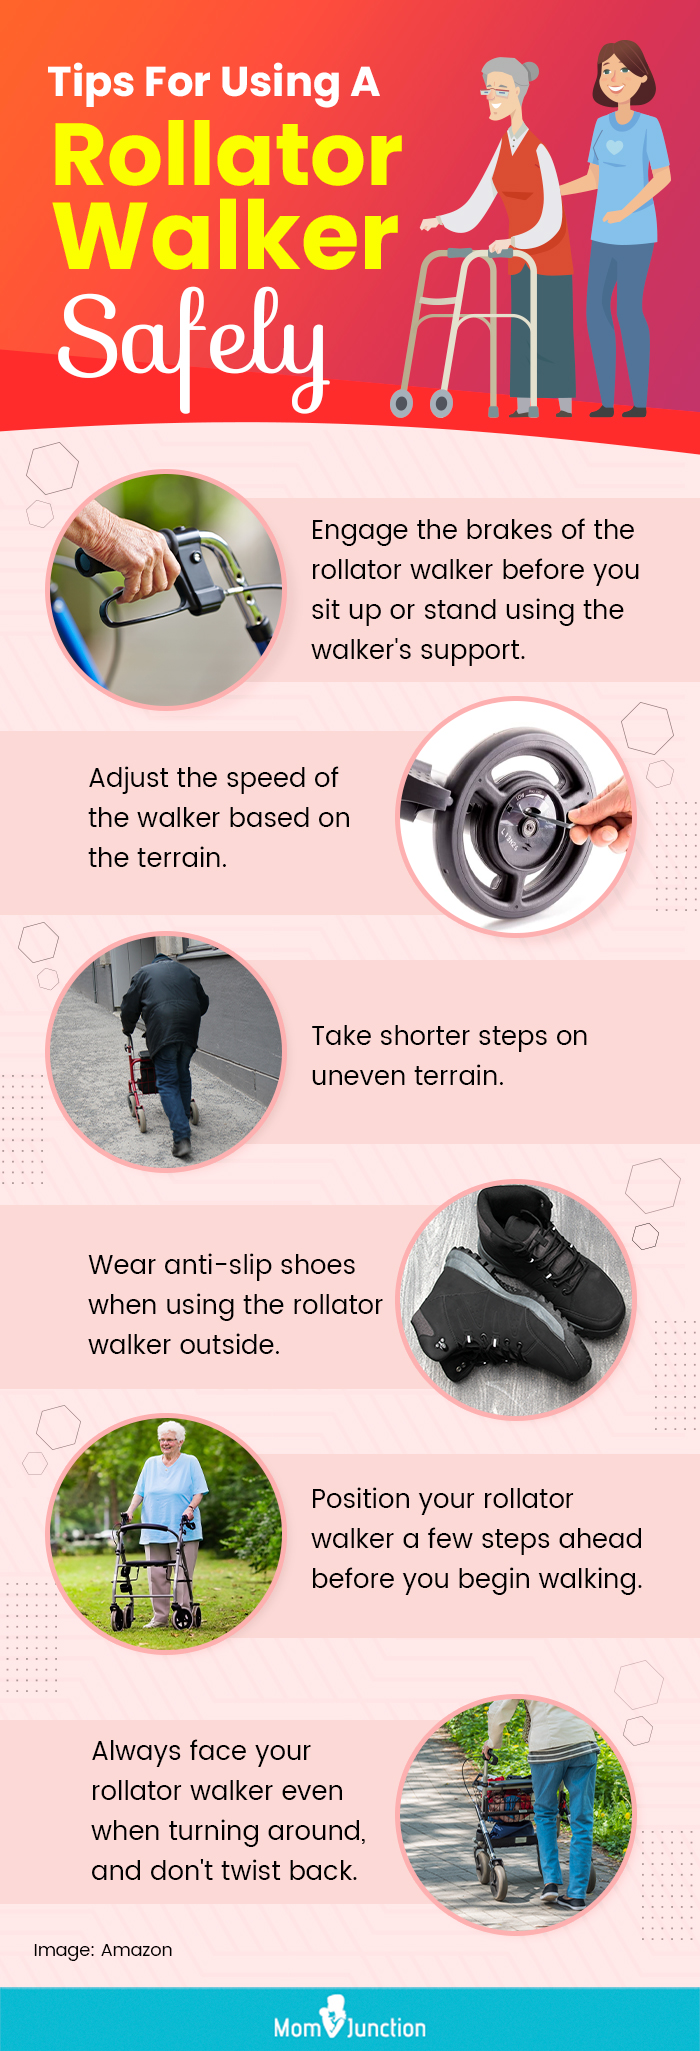 Tips-For-Using-A-Rollator-Walker-Safely (infographic)